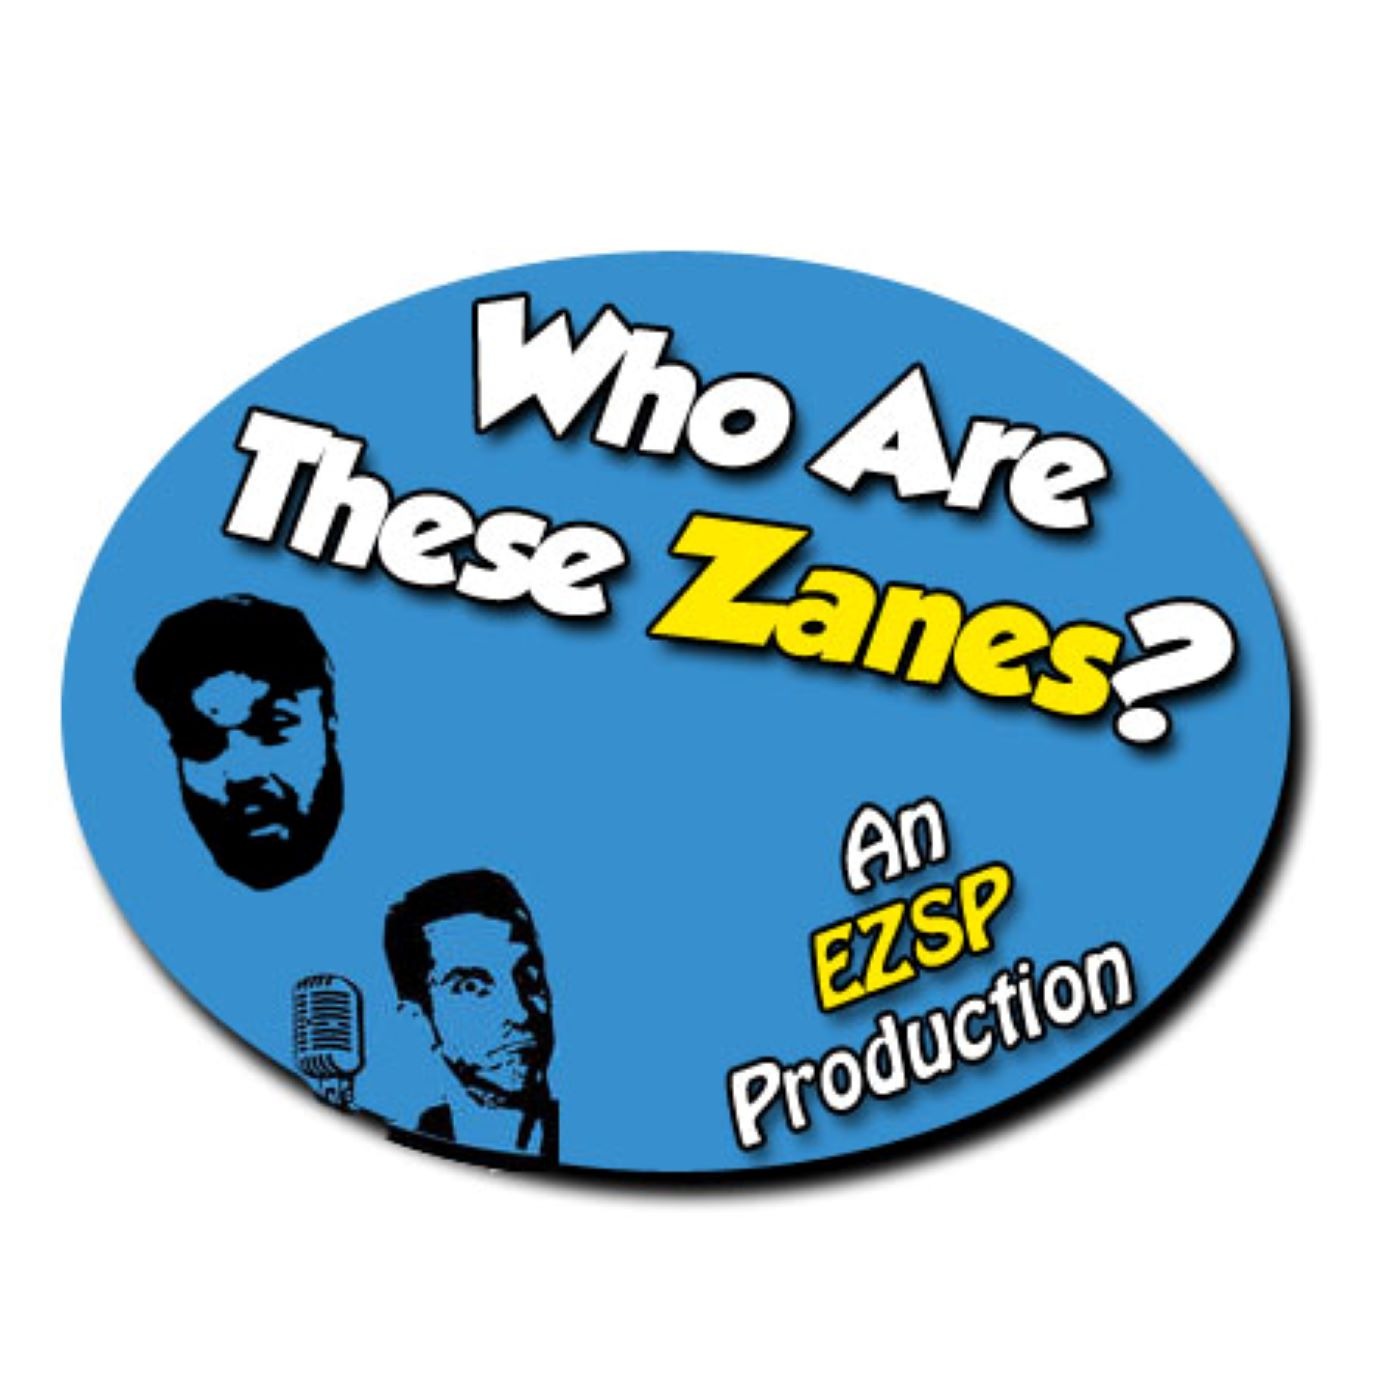 Highlight - Who Are These Zanes? Ep 035 - First Morning Show 105.7 The Hawk on the Jersey Shore